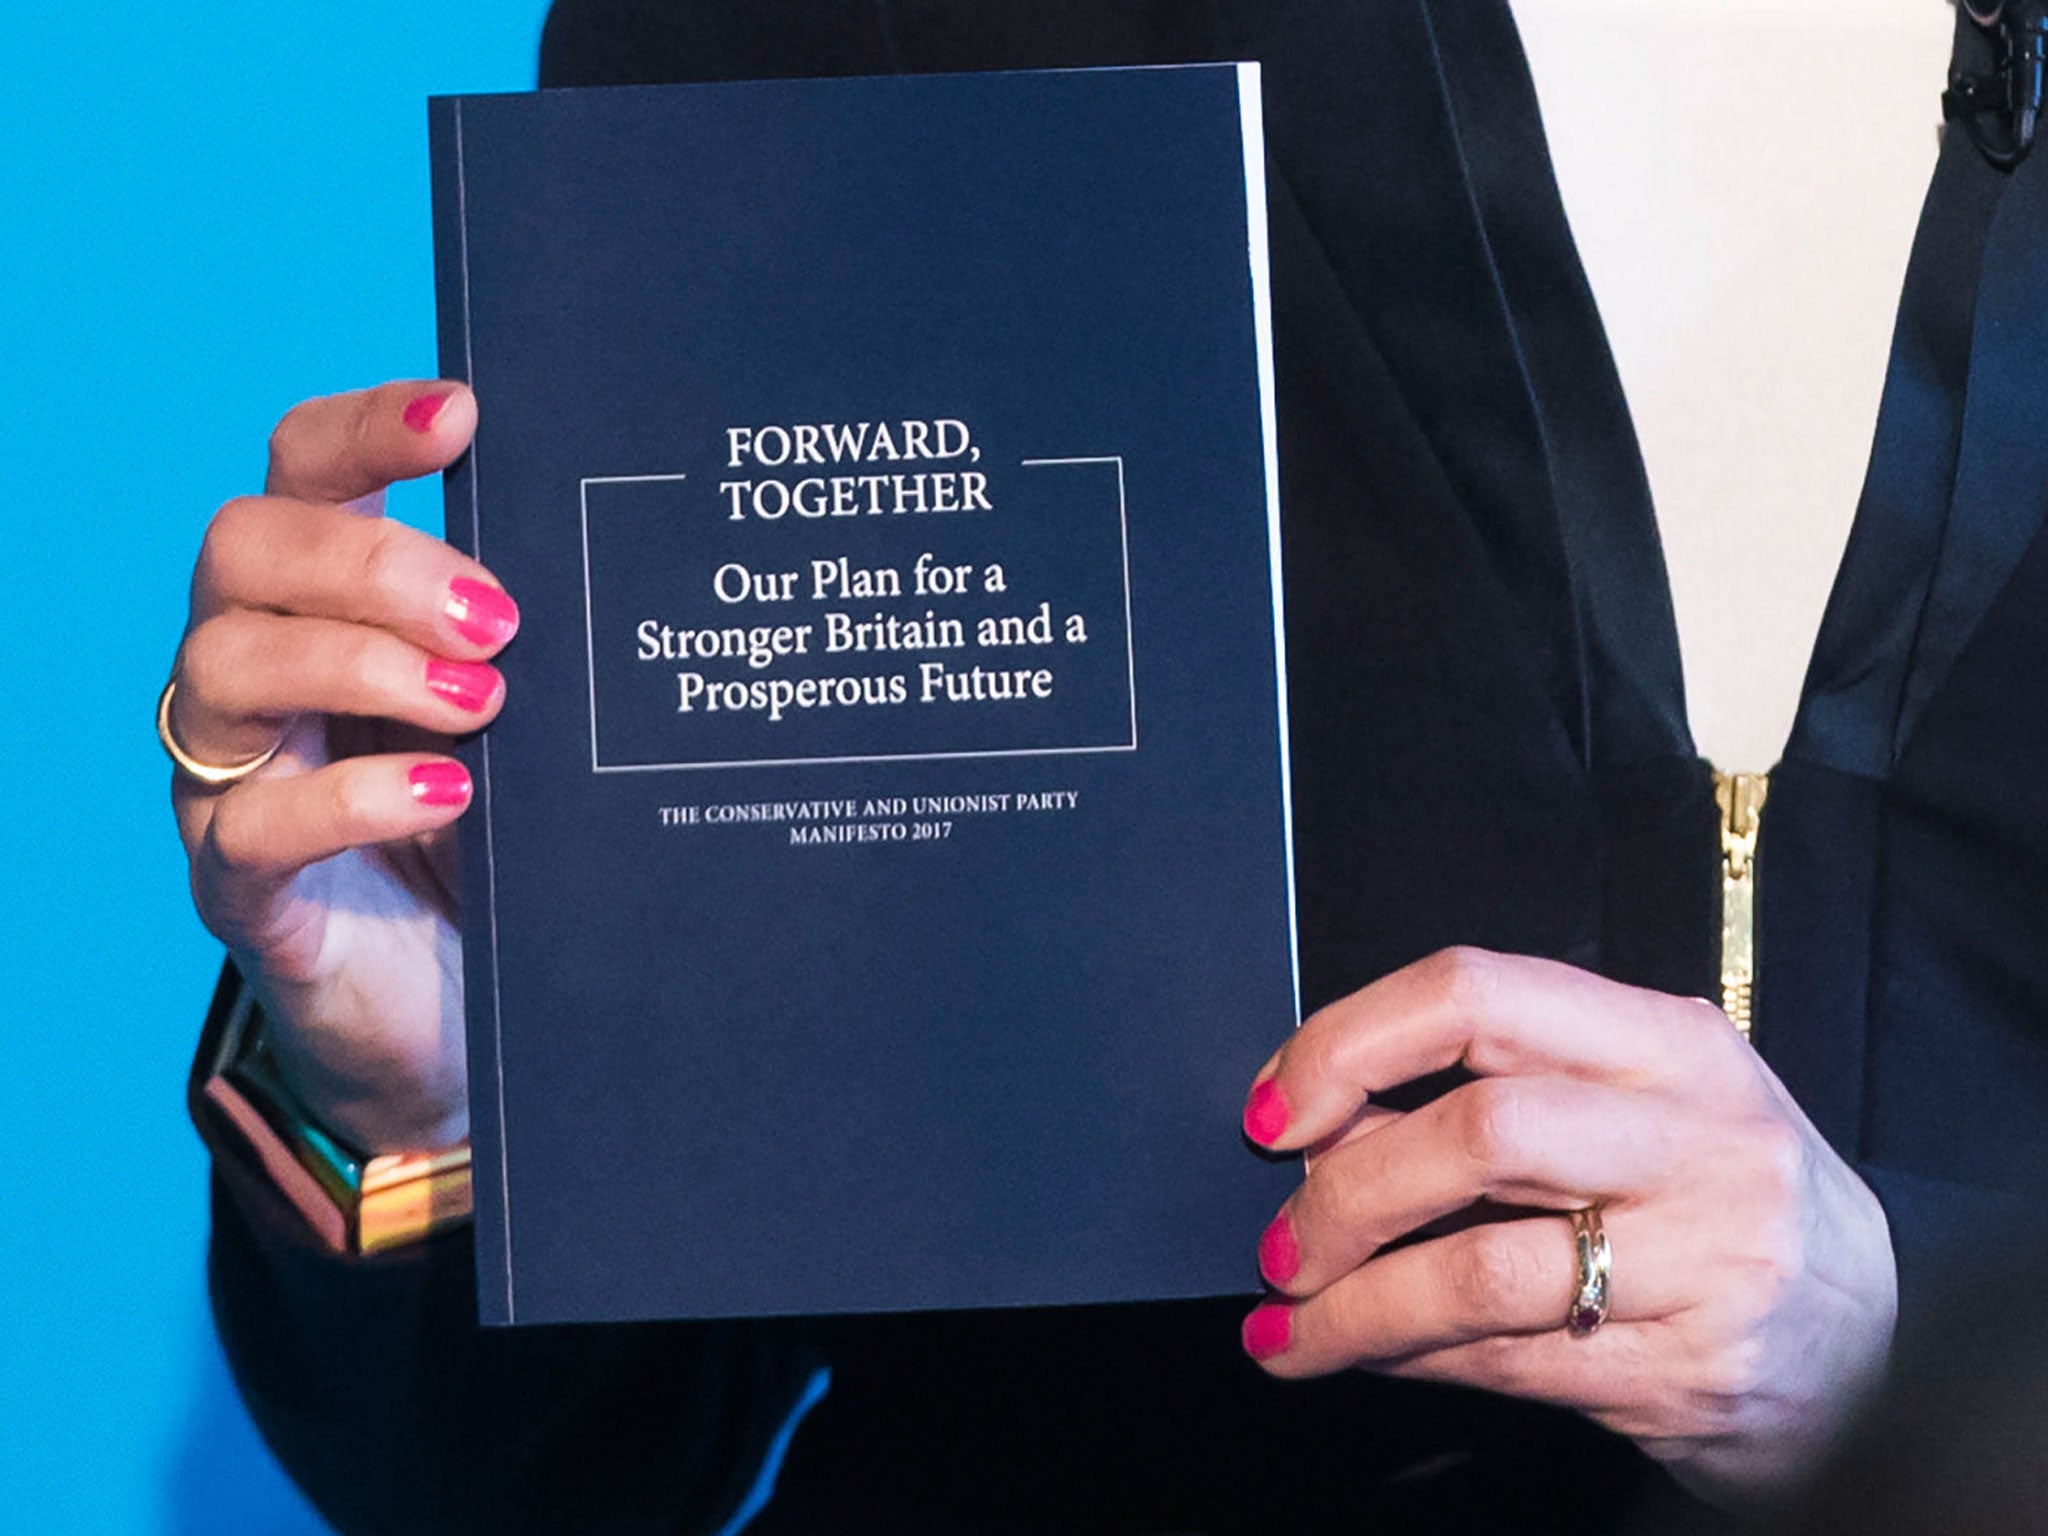 Theresa May holding the Tory manifesto during the launch in Halifax